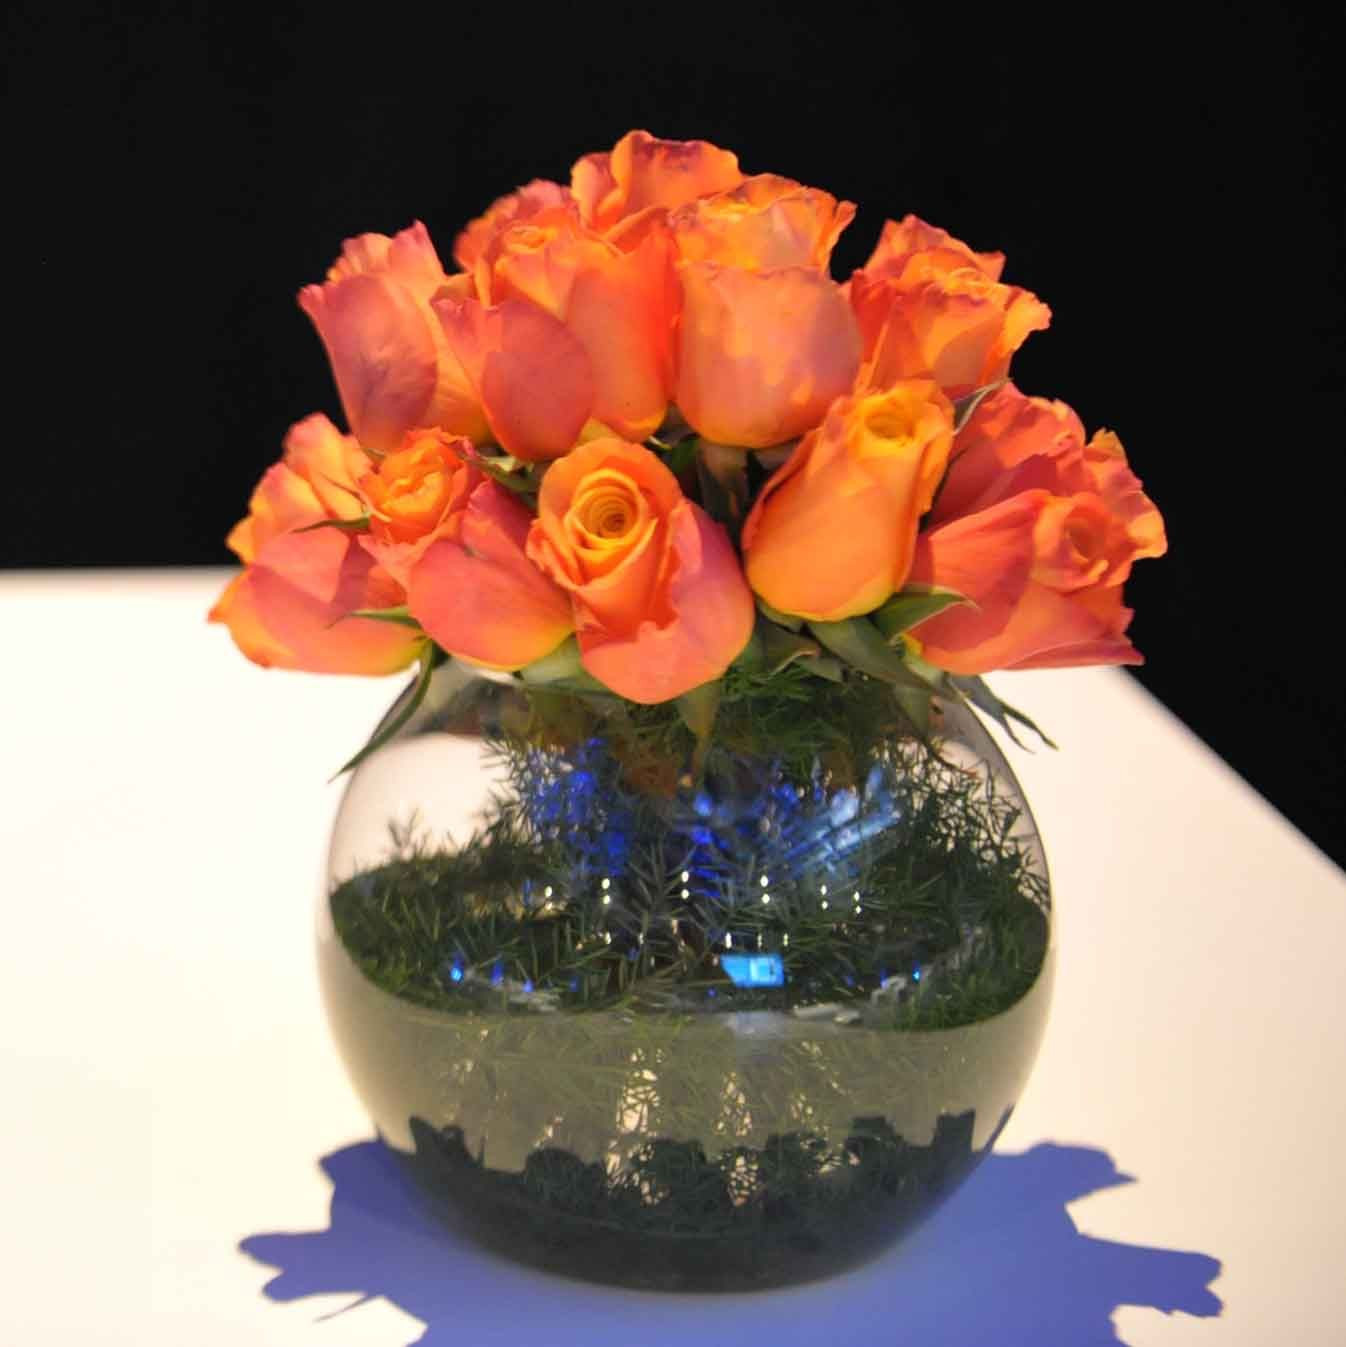 27 Stylish Fish In Flower Vase 2024 free download fish in flower vase of orange flower vase photos 8 od orange rose foliage lined gold fish inside orange flower vase photos 8 od orange rose foliage lined gold fish bowl of orange flower